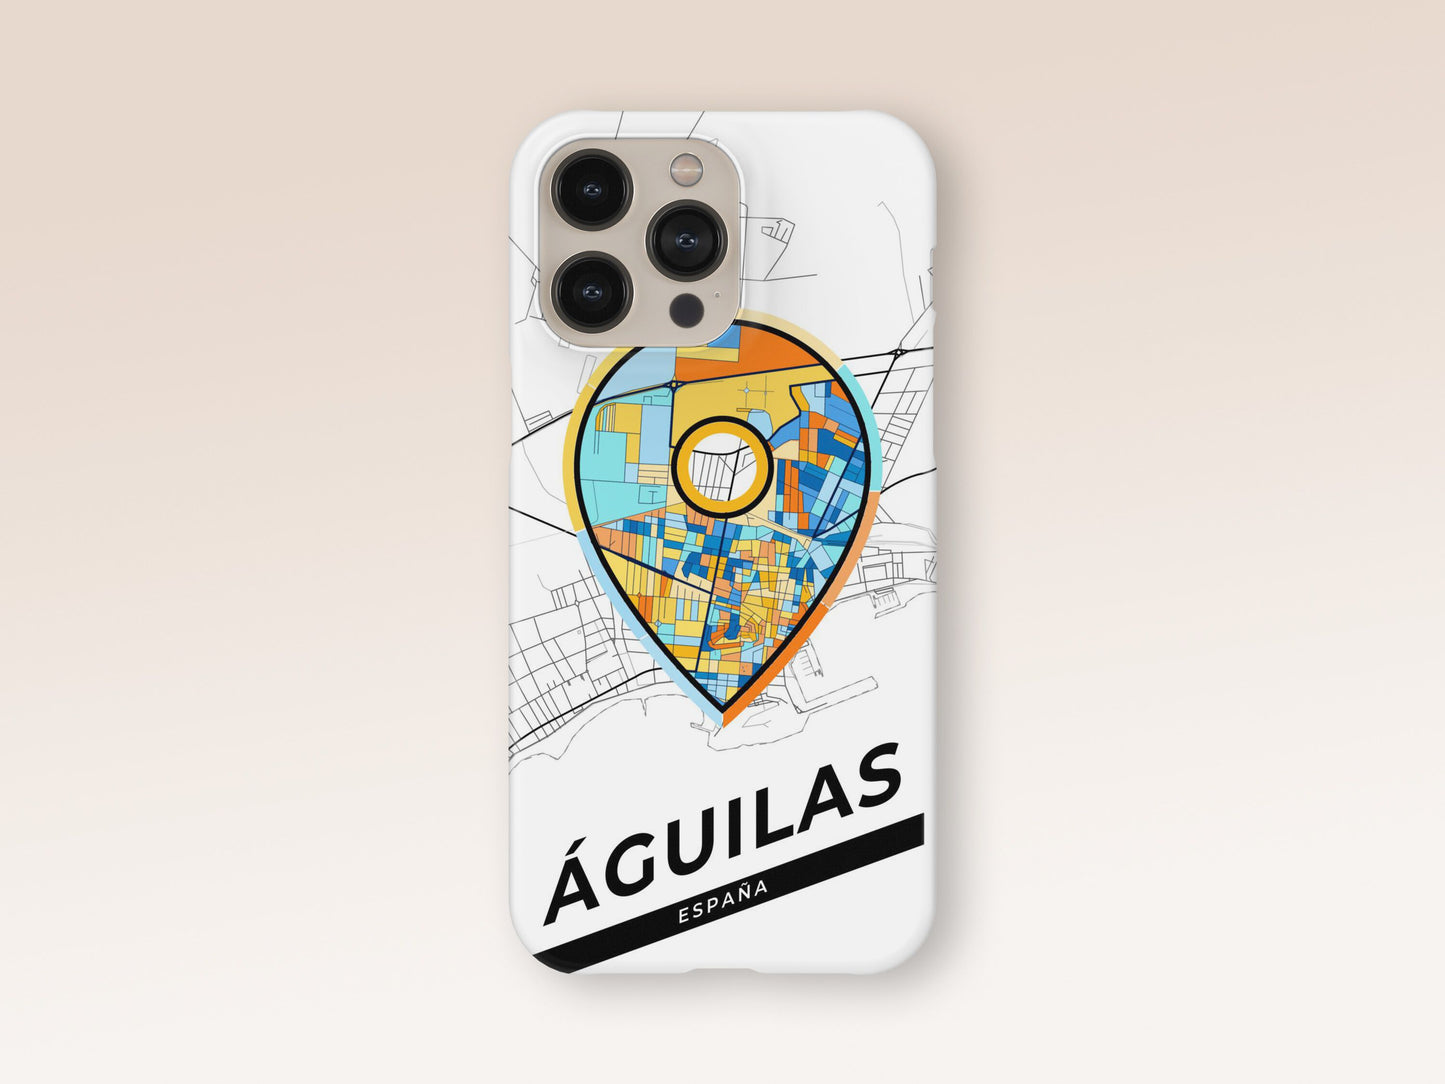 Águilas Spain slim phone case with colorful icon. Birthday, wedding or housewarming gift. Couple match cases. 1